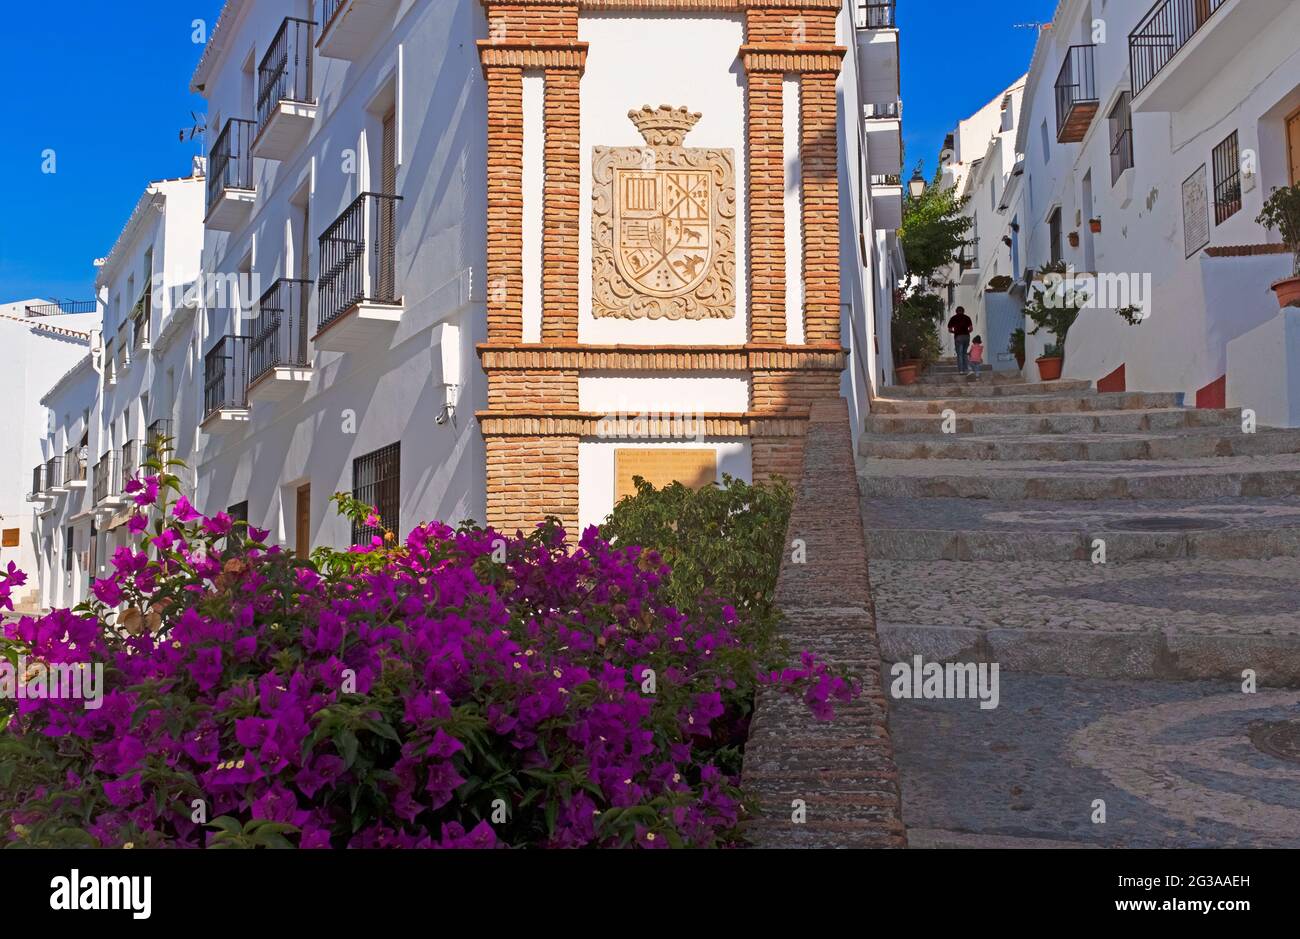 A view of the Moorish-Mudéjar district of Frigiliana, made up of steep cobbled alleyways winding past white houses resplendent with flowers, Spain Stock Photo